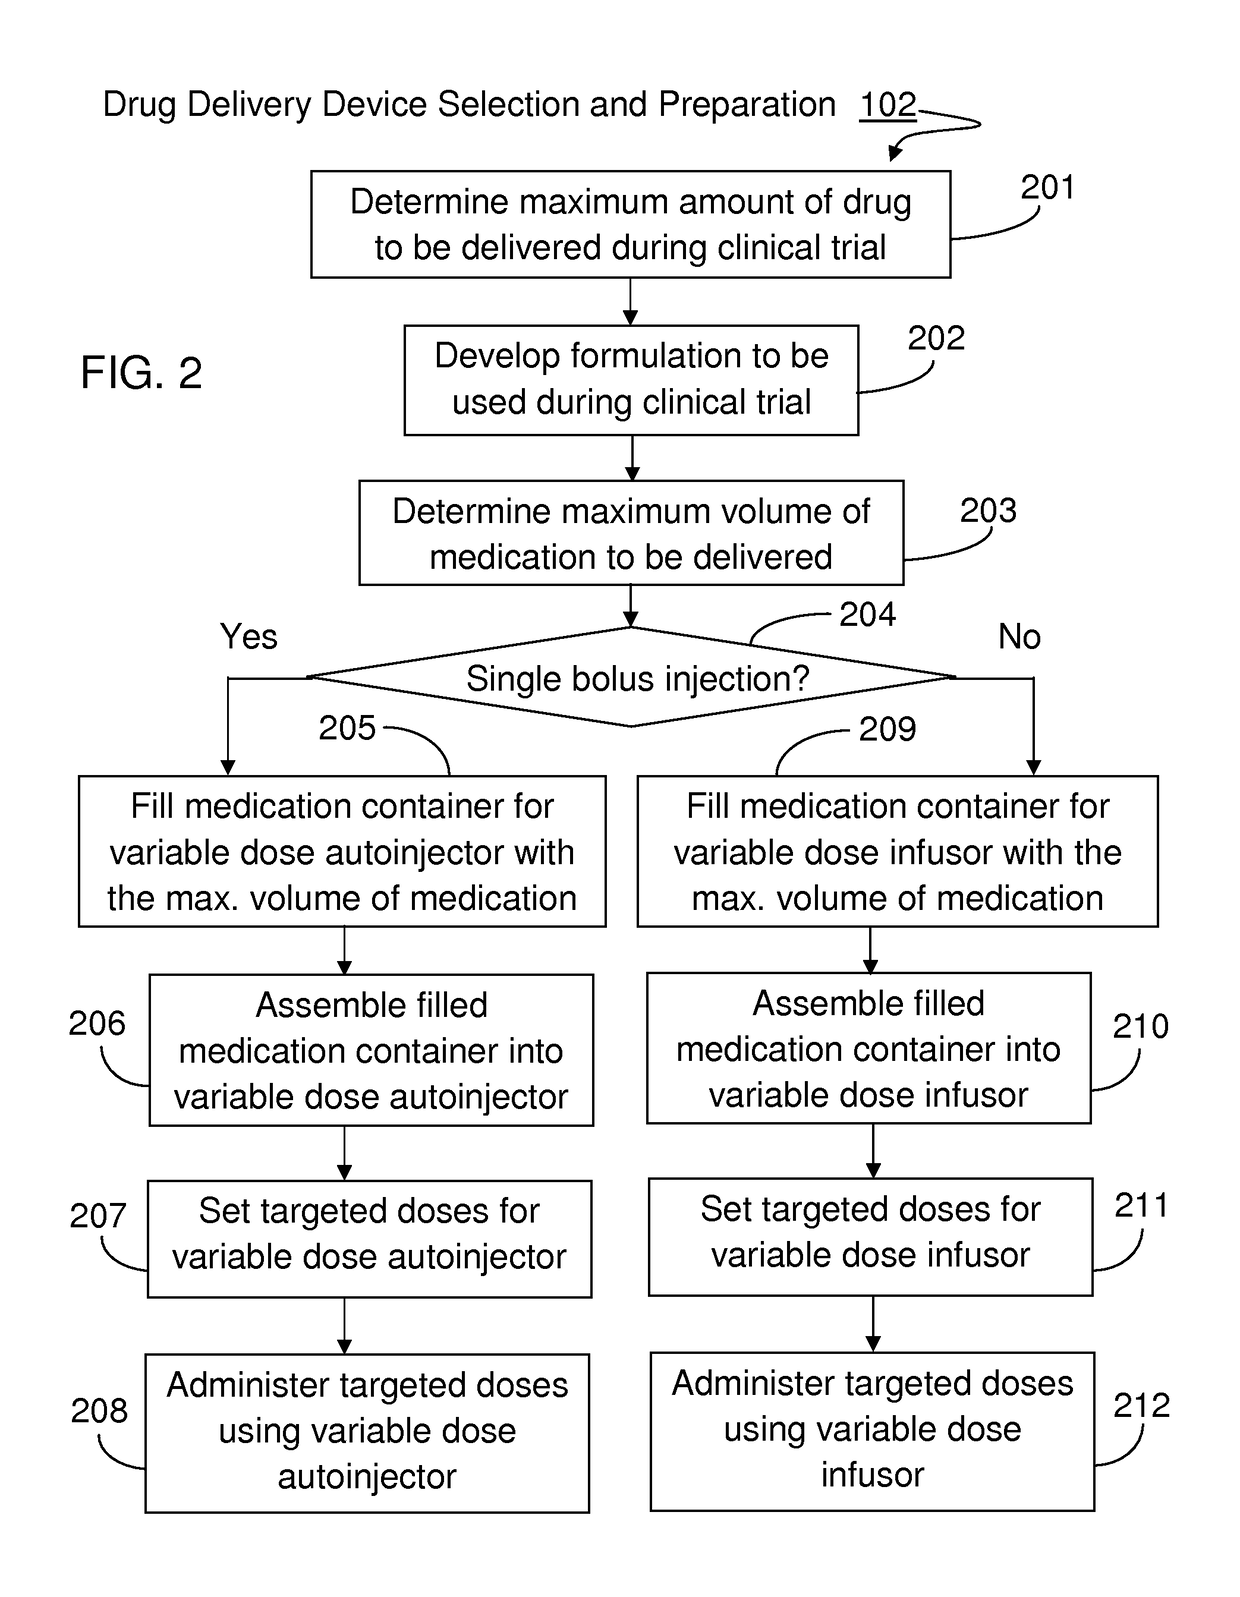 Method for developing parenteral therapeutic product with drug delivery device through clinical trial